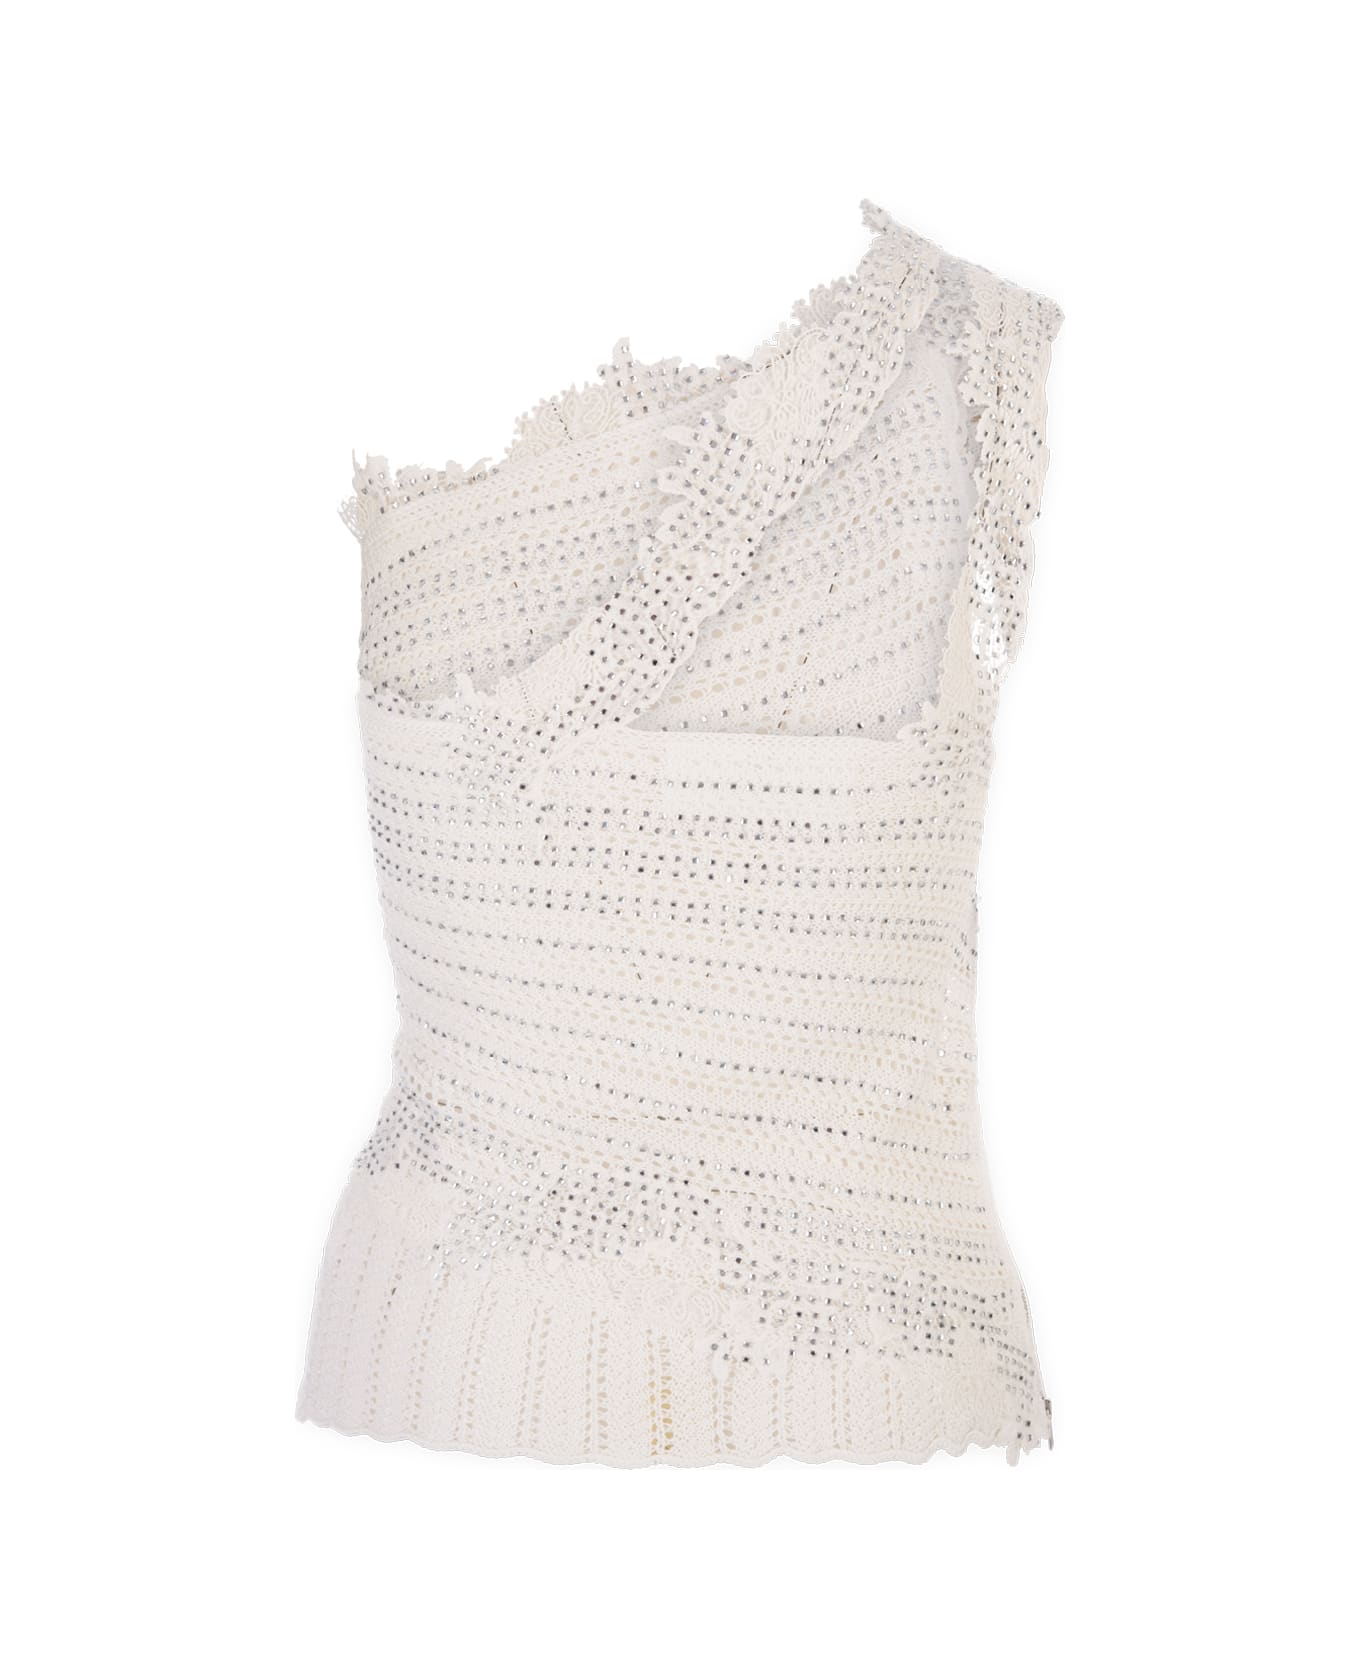 Ermanno Scervino White Cotton Top With Lace And Crystals - White